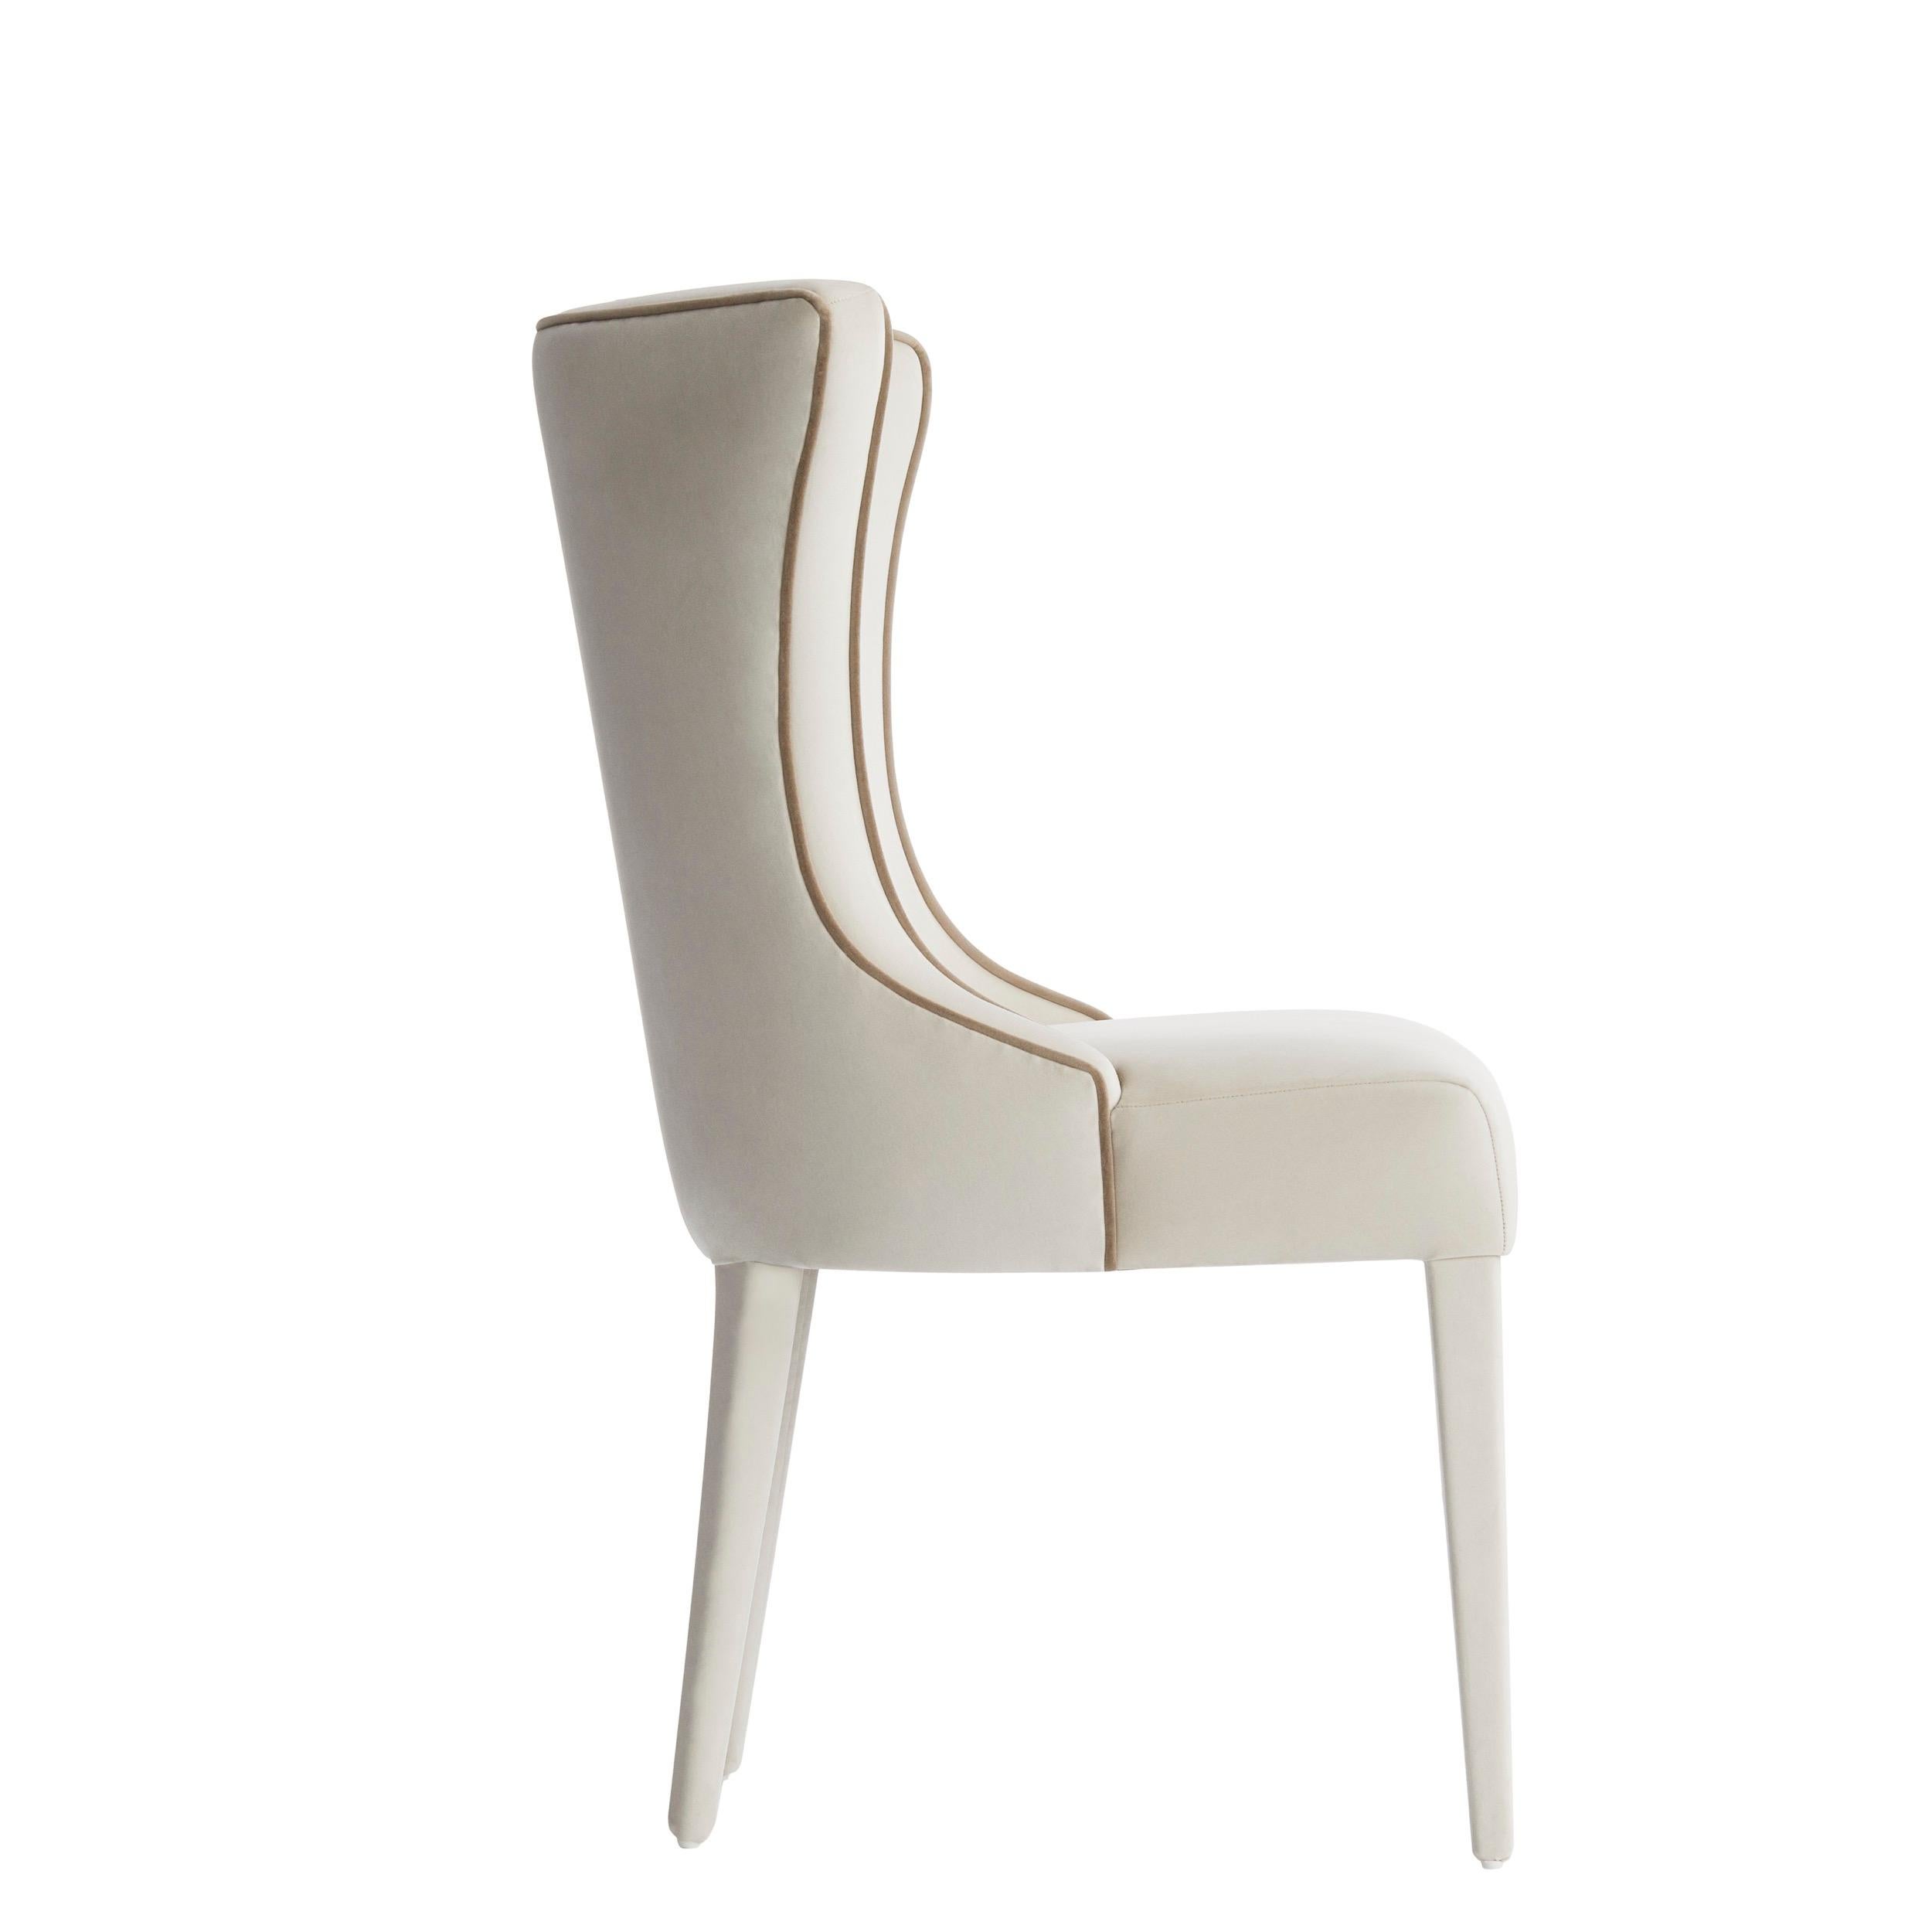 VENTURA  is a classic chair by Casa Magna, characterized by the enveloping backrest and the elegant contrasting piping that runs along the entire backrest.‎ Ventura is the perfect chair for any dining room.‎ Legs and structure can also be